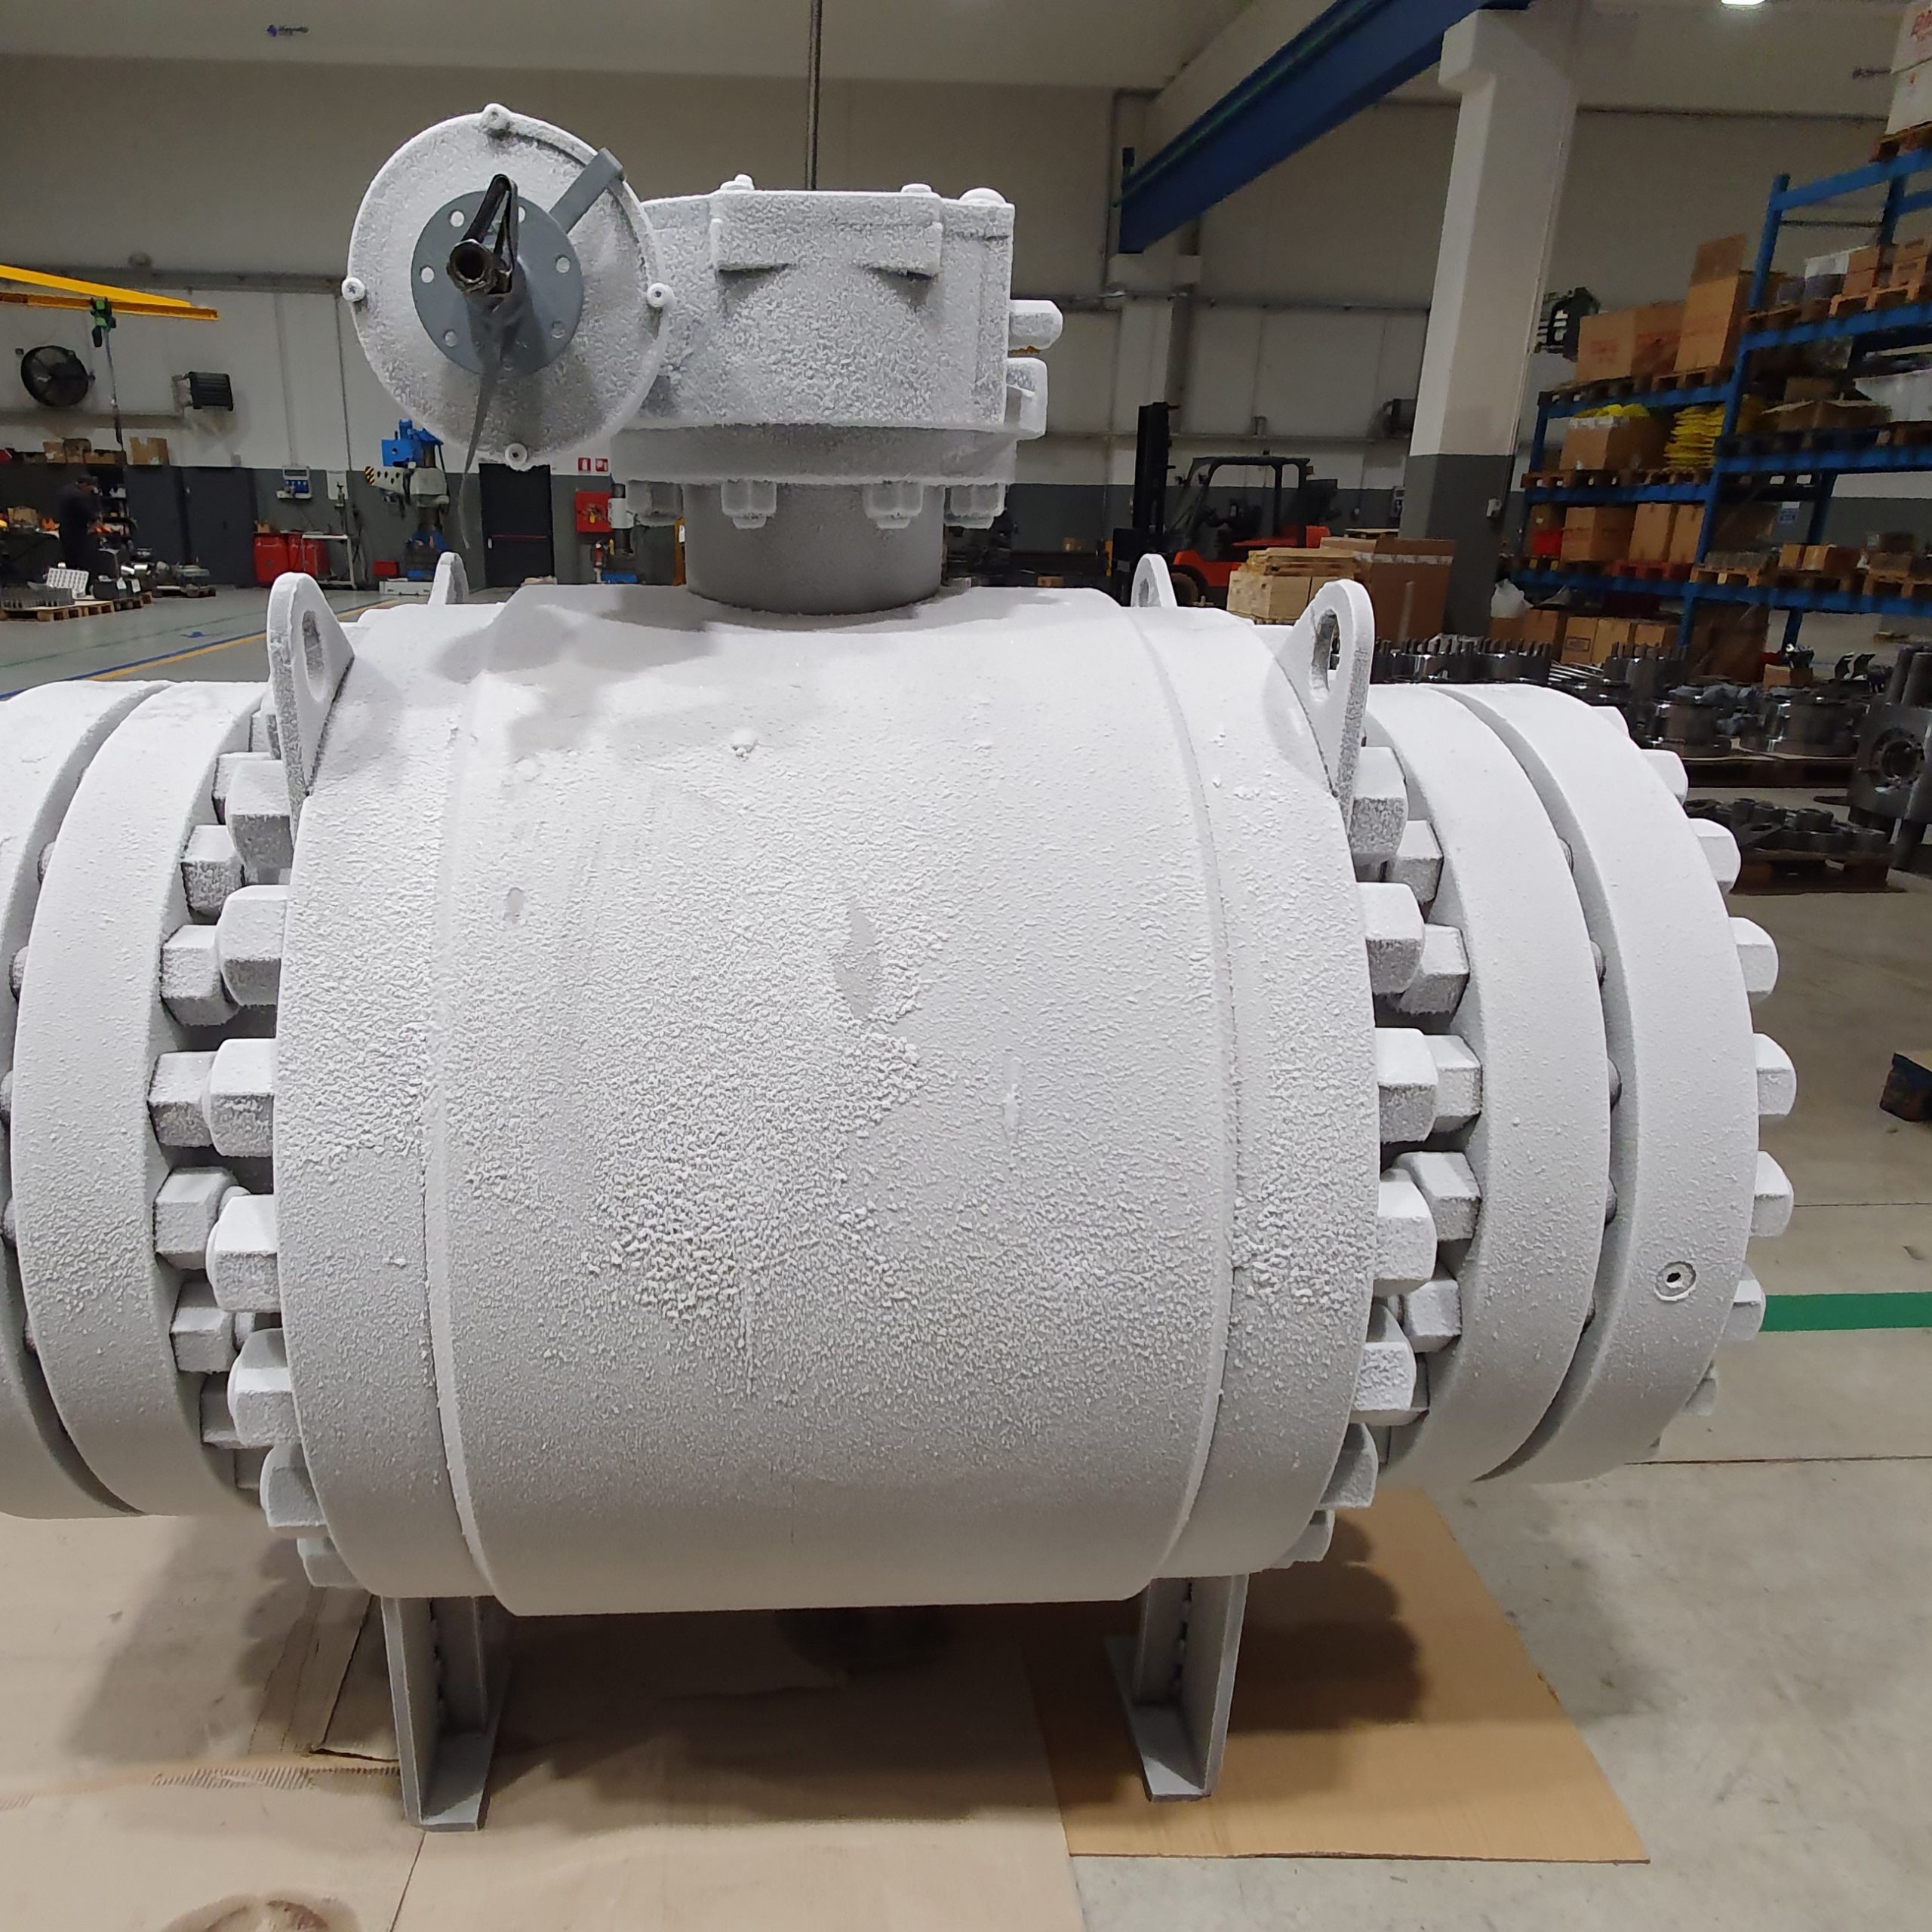 FG Valvole - Installation of cryogenic equipment and production of the first Cryogenic Valves